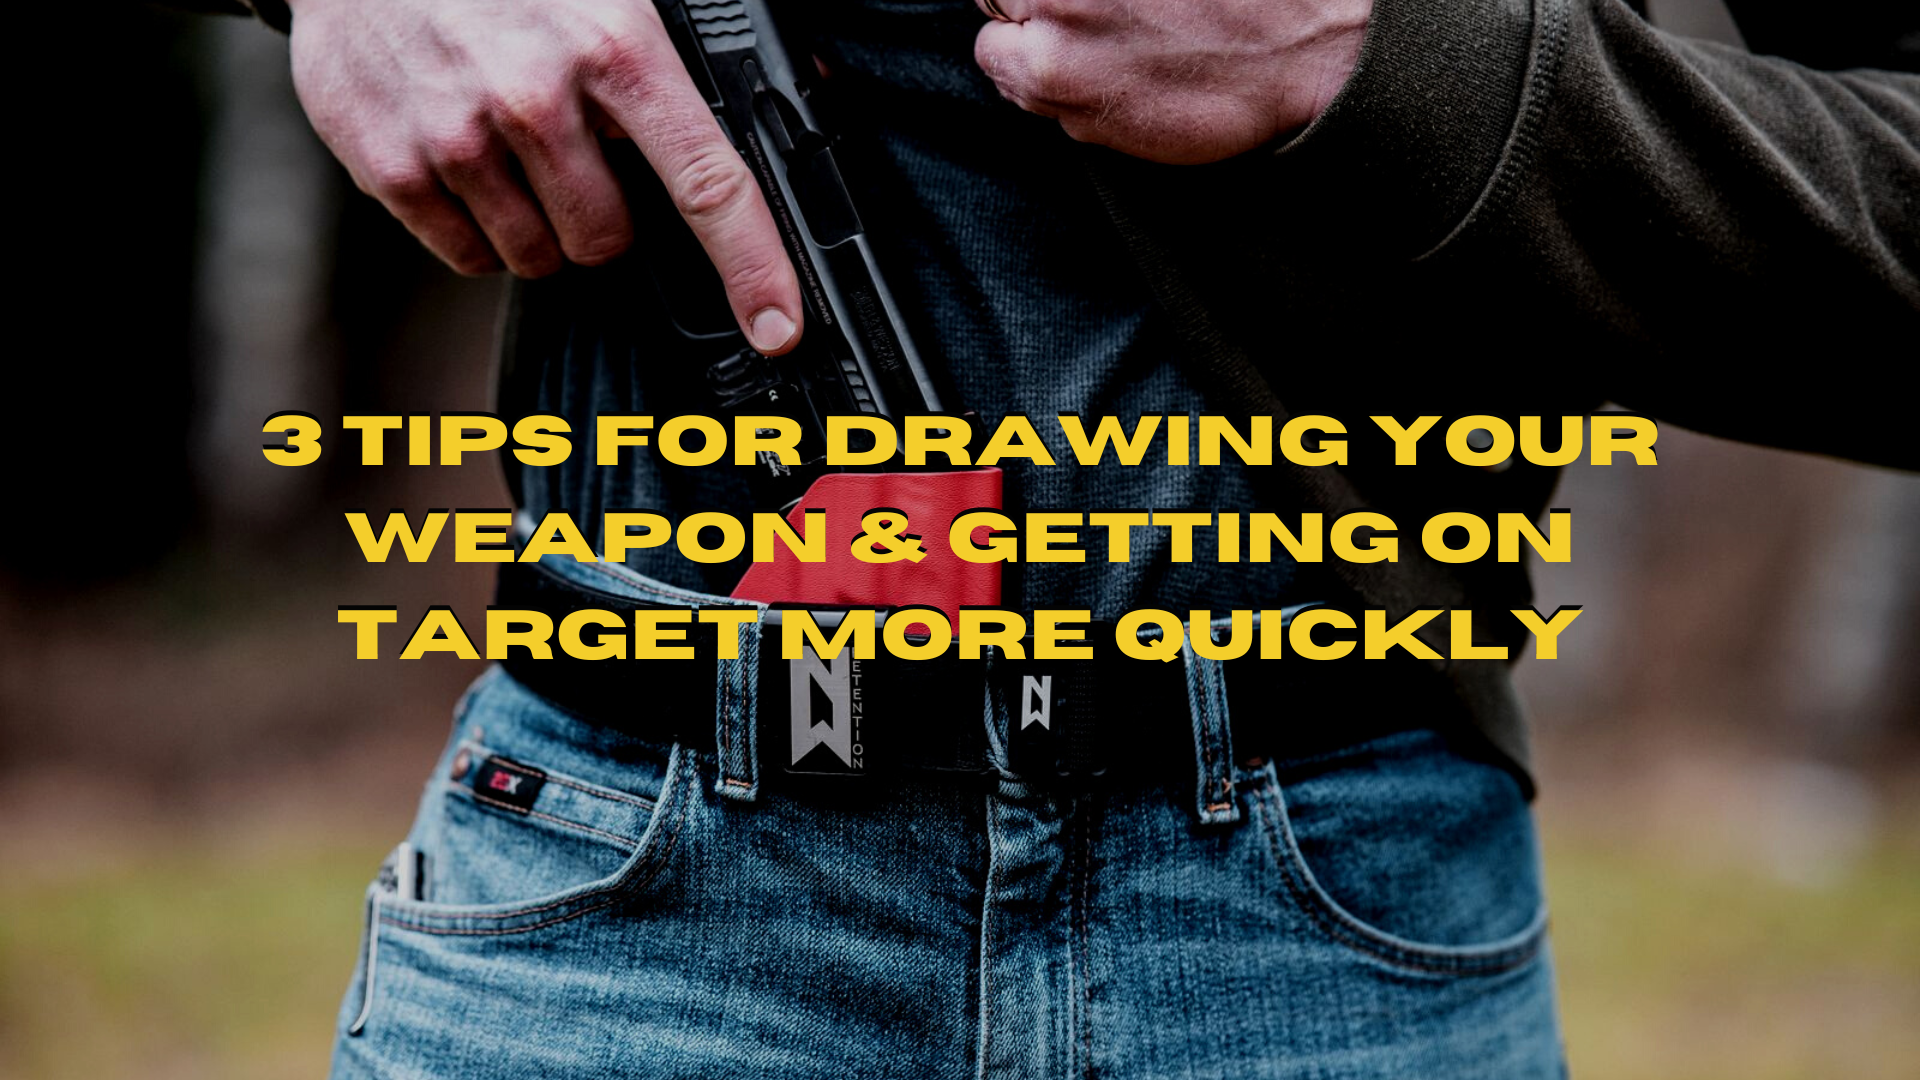 3 Tips for Drawing Your Weapon & Getting on Target More Quickly